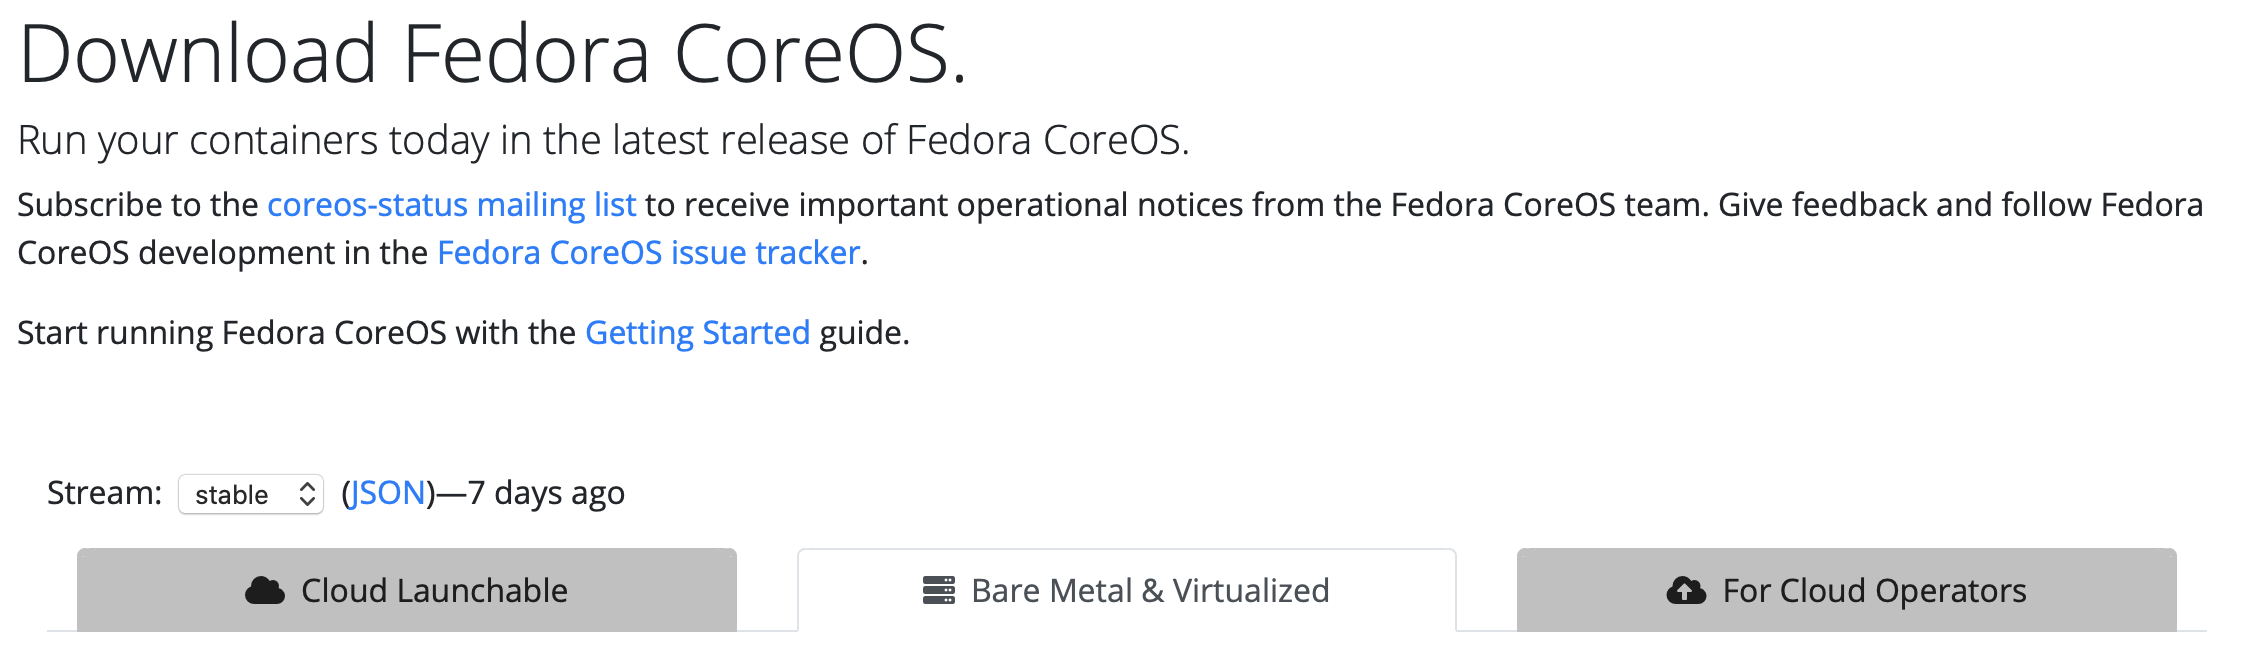 FCOS Download Page